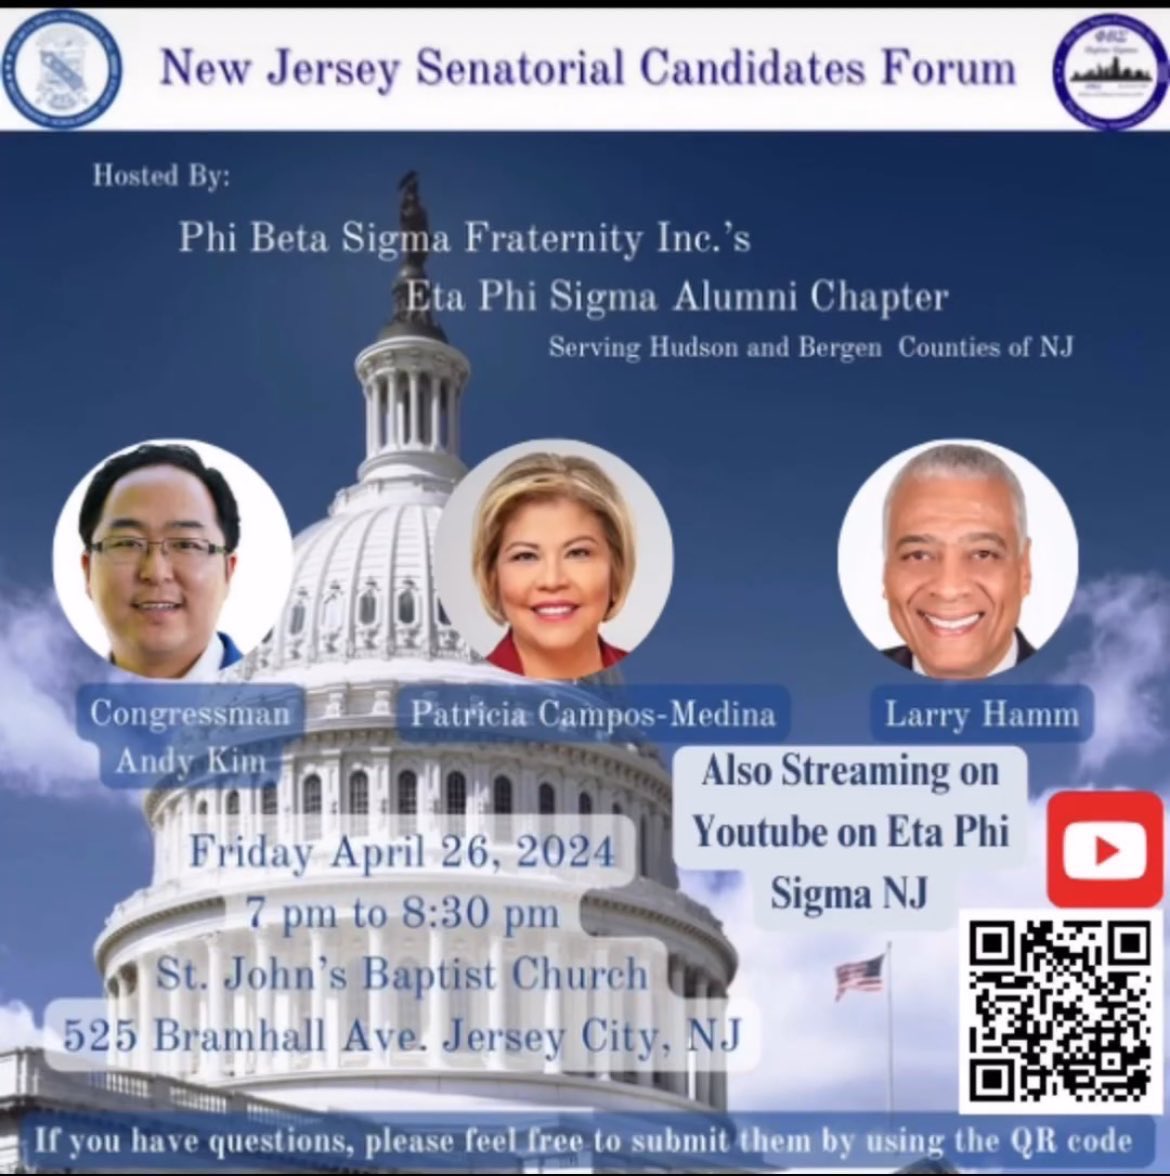 Thank you, Eta Phi Sigma for inviting me to your NJ Senatorial Candidate Forum to discuss crucial issues facing New Jerseyans. See you at St. John’s Baptist Church, 525 Bramhall Ave in Jersey City, from 7 pm to 8:30 pm. Don't miss this opportunity for meaningful dialogue!